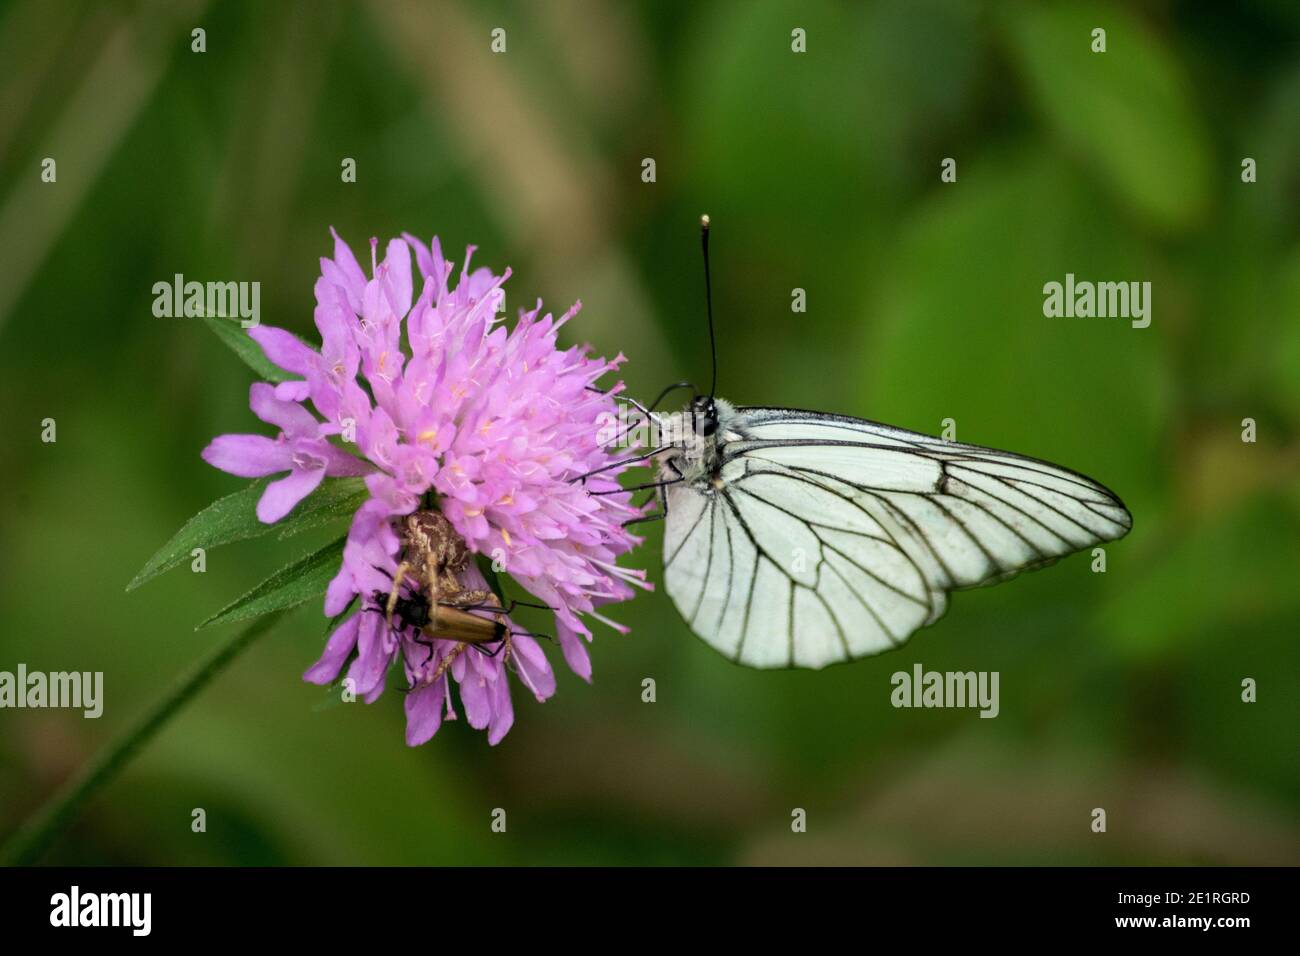 А beautiful white butterflies on the flower- Aporia crataegi. A spider has caught a beetle. Stock Photo